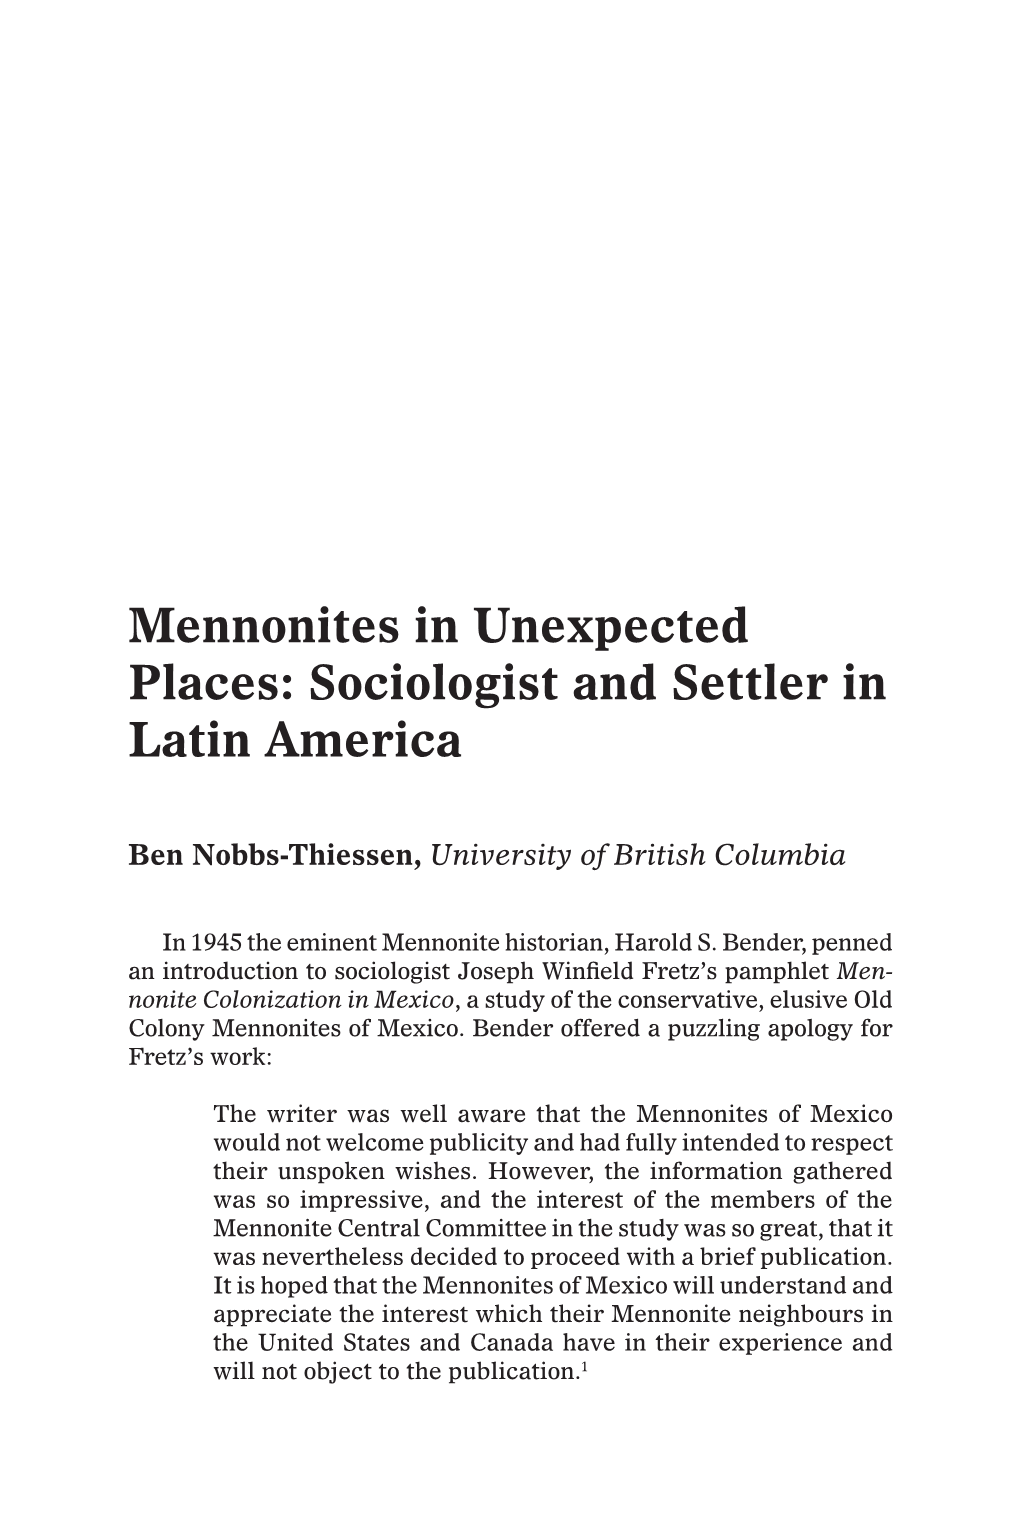 Mennonites in Unexpected Places: Sociologist and Settler in Latin America